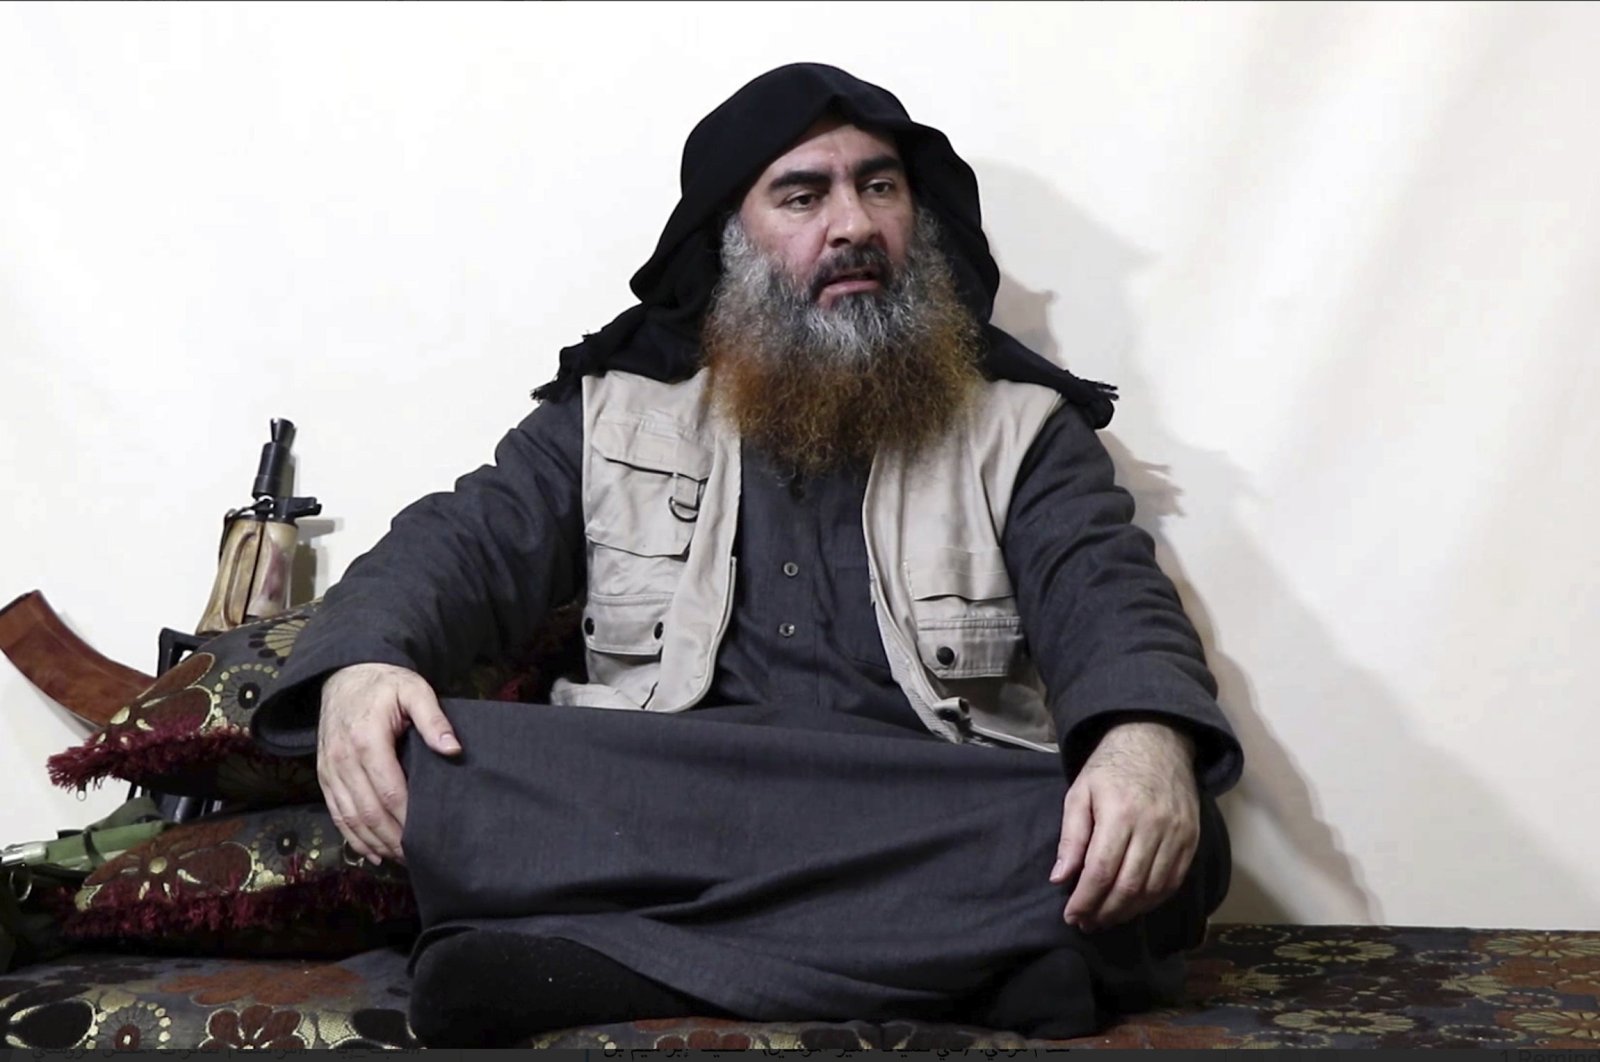 This file image made from video posted on a militant website on April 29, 2019, purports to show the leader of Daesh, Abu Bakr al-Baghdadi, being interviewed by his group's Al-Furqan media outlet. (AP Photo)